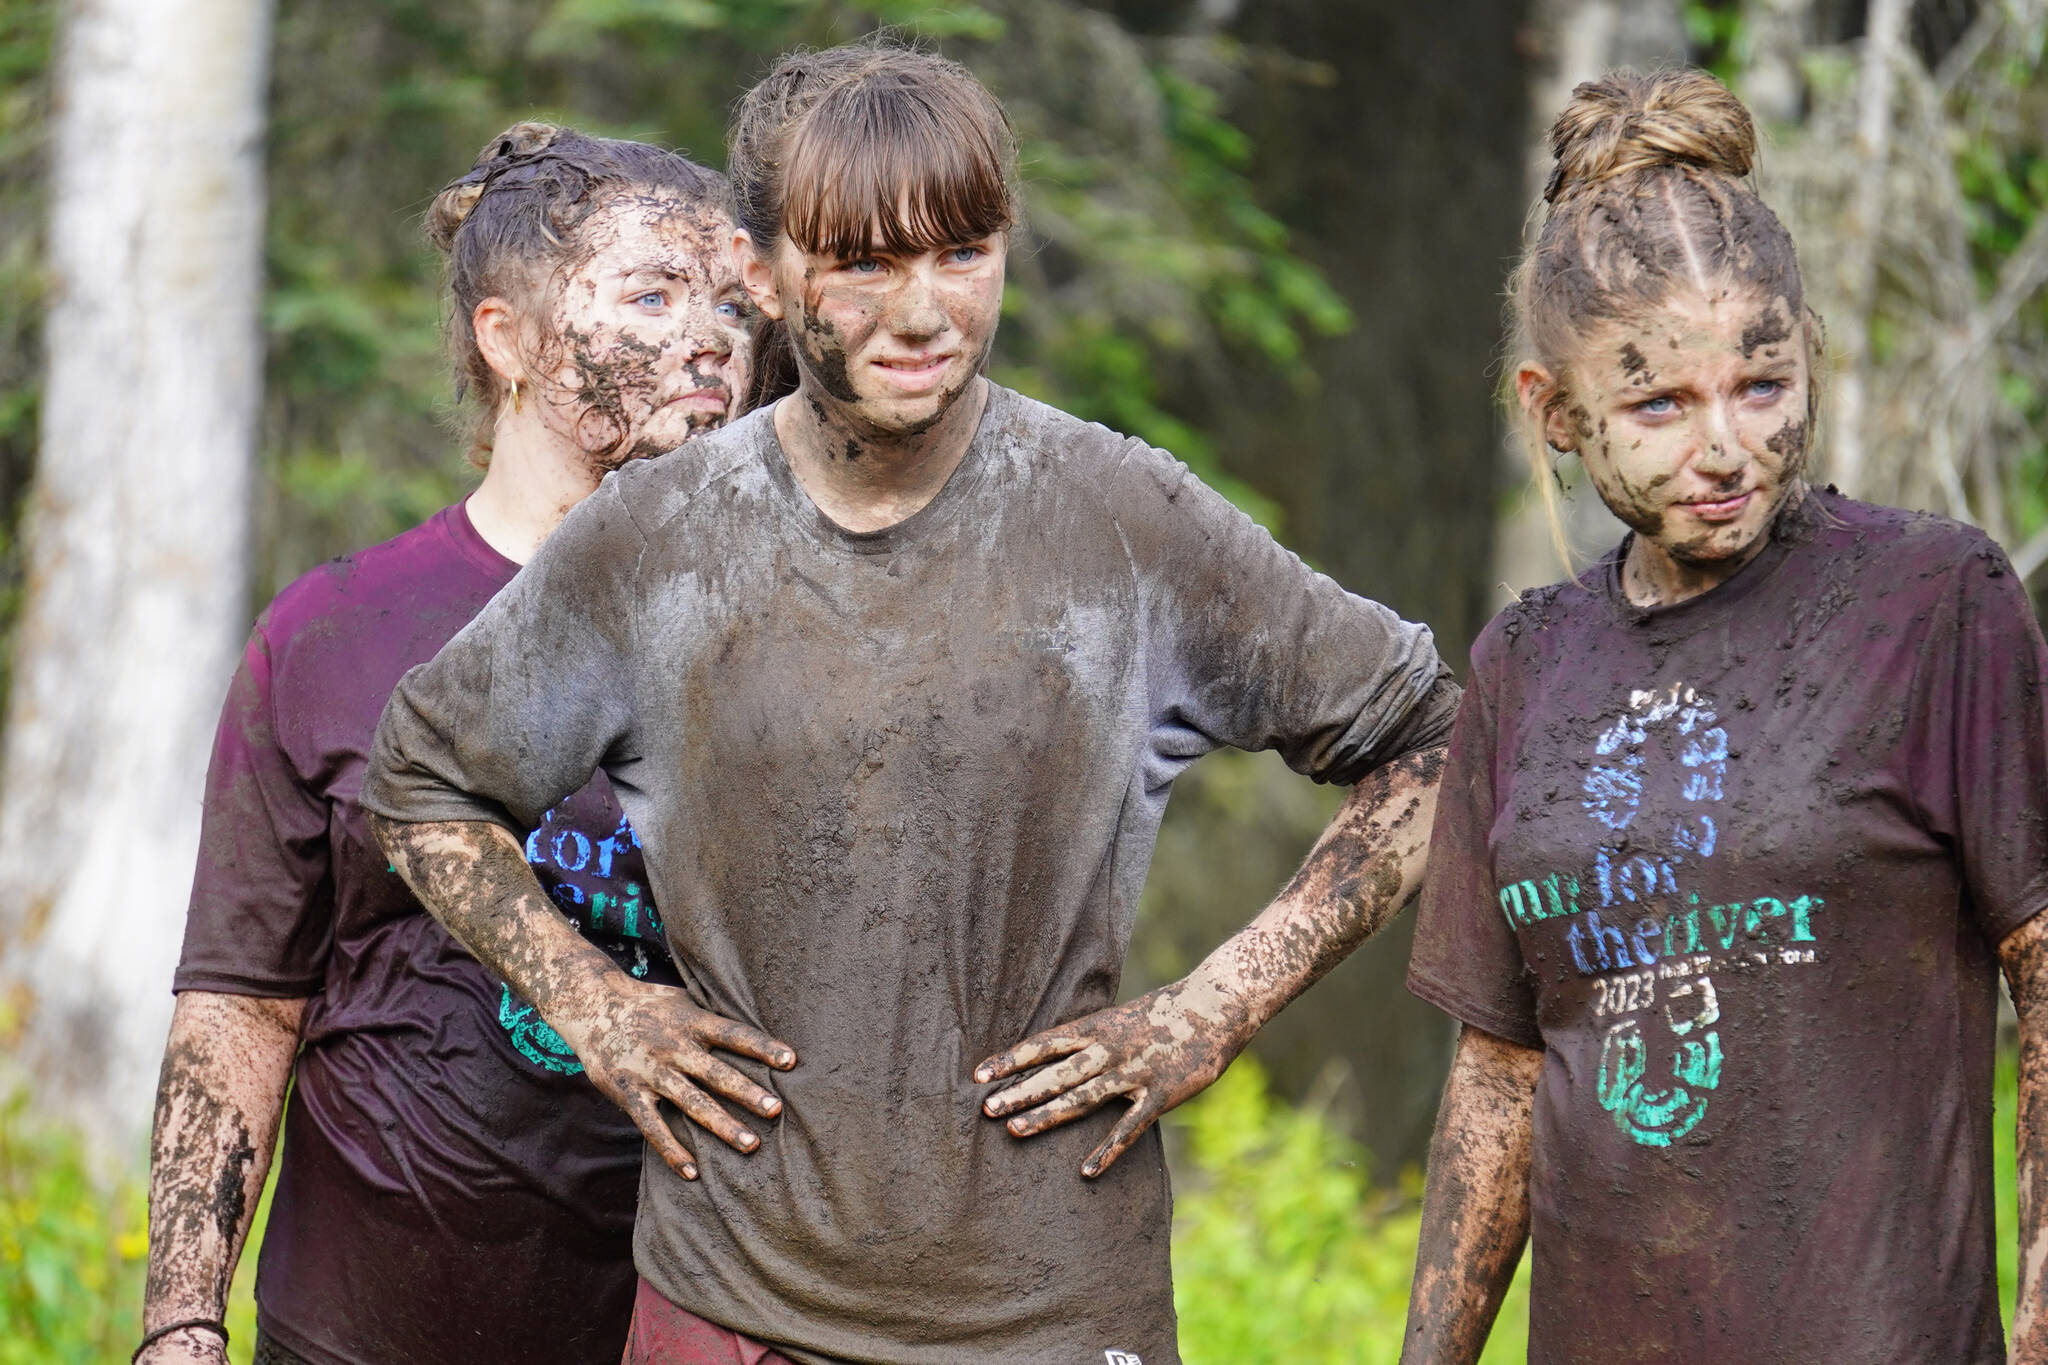 Contestants line up as judges decide who will be “The Muddiest” at the conclusion of the KDLL Mud Run at Tsalteshi Trails in Soldotna, Alaska, on Friday, June 16, 2023. (Jake Dye/Peninsula Clarion)